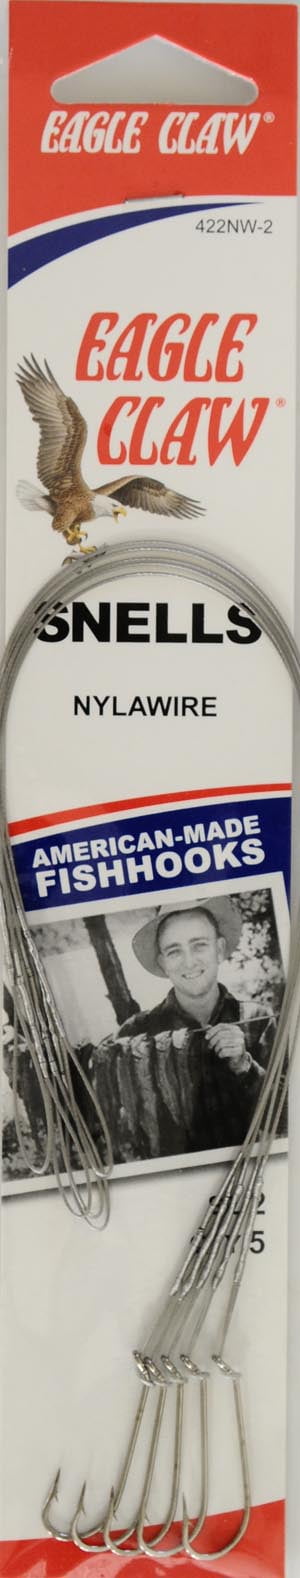 Eagle Claw 422nwh-4/0 Nylawire O'Shaughnessy Hook, Nickel, Size 4/0